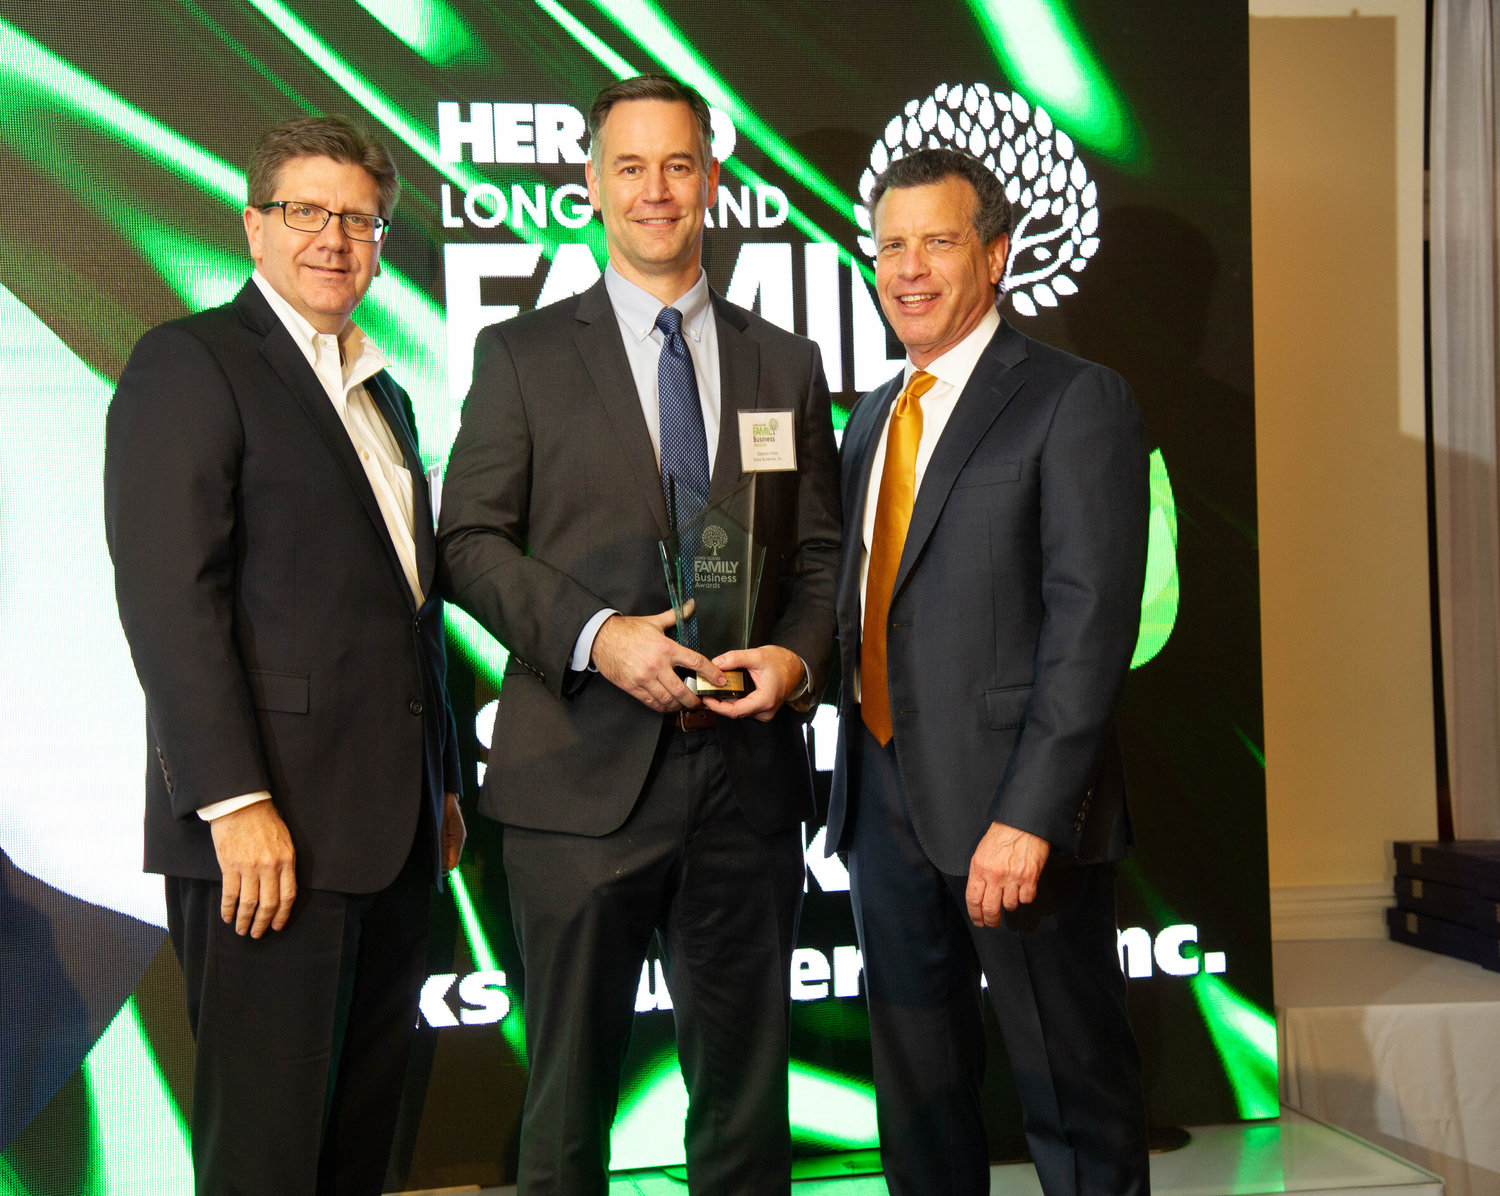 President of Hicks Nurseries Stephen Hicks, center, accepted the Green Legacy Award from Managing Partner of Campolo, Middleton & McCormick, Joe Campolo, left, and CEO and Publisher of Richner Communications, Stuart Richner, right.